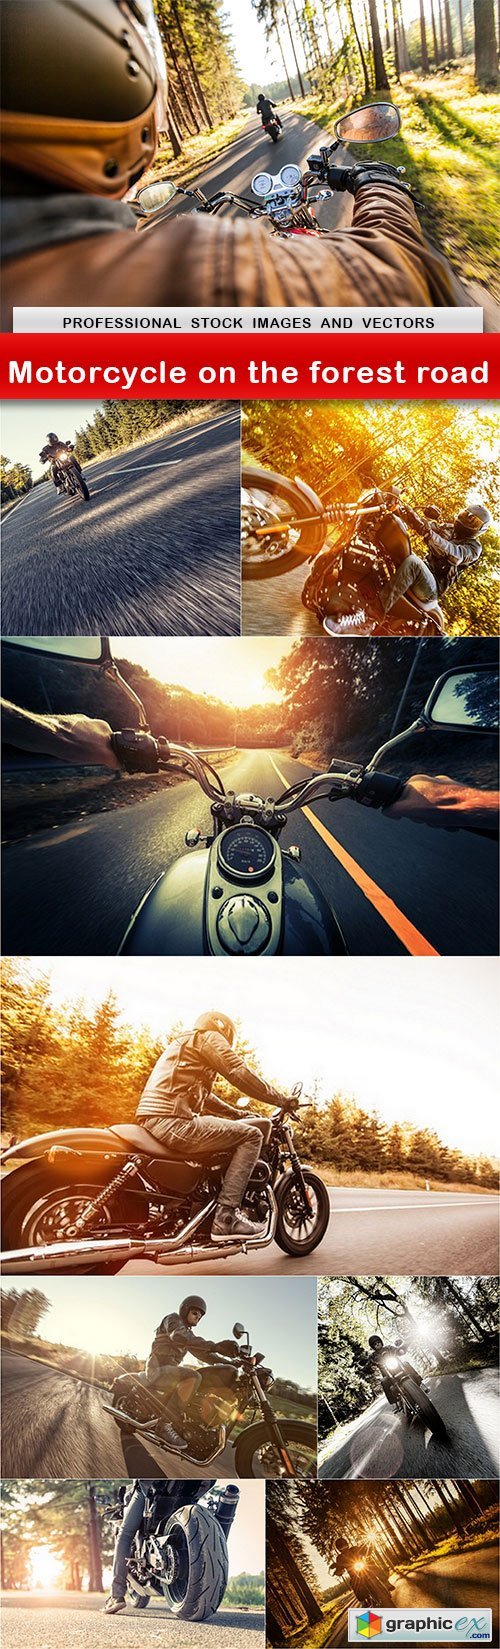 Motorcycle on the forest road - 9 UHQ JPEG